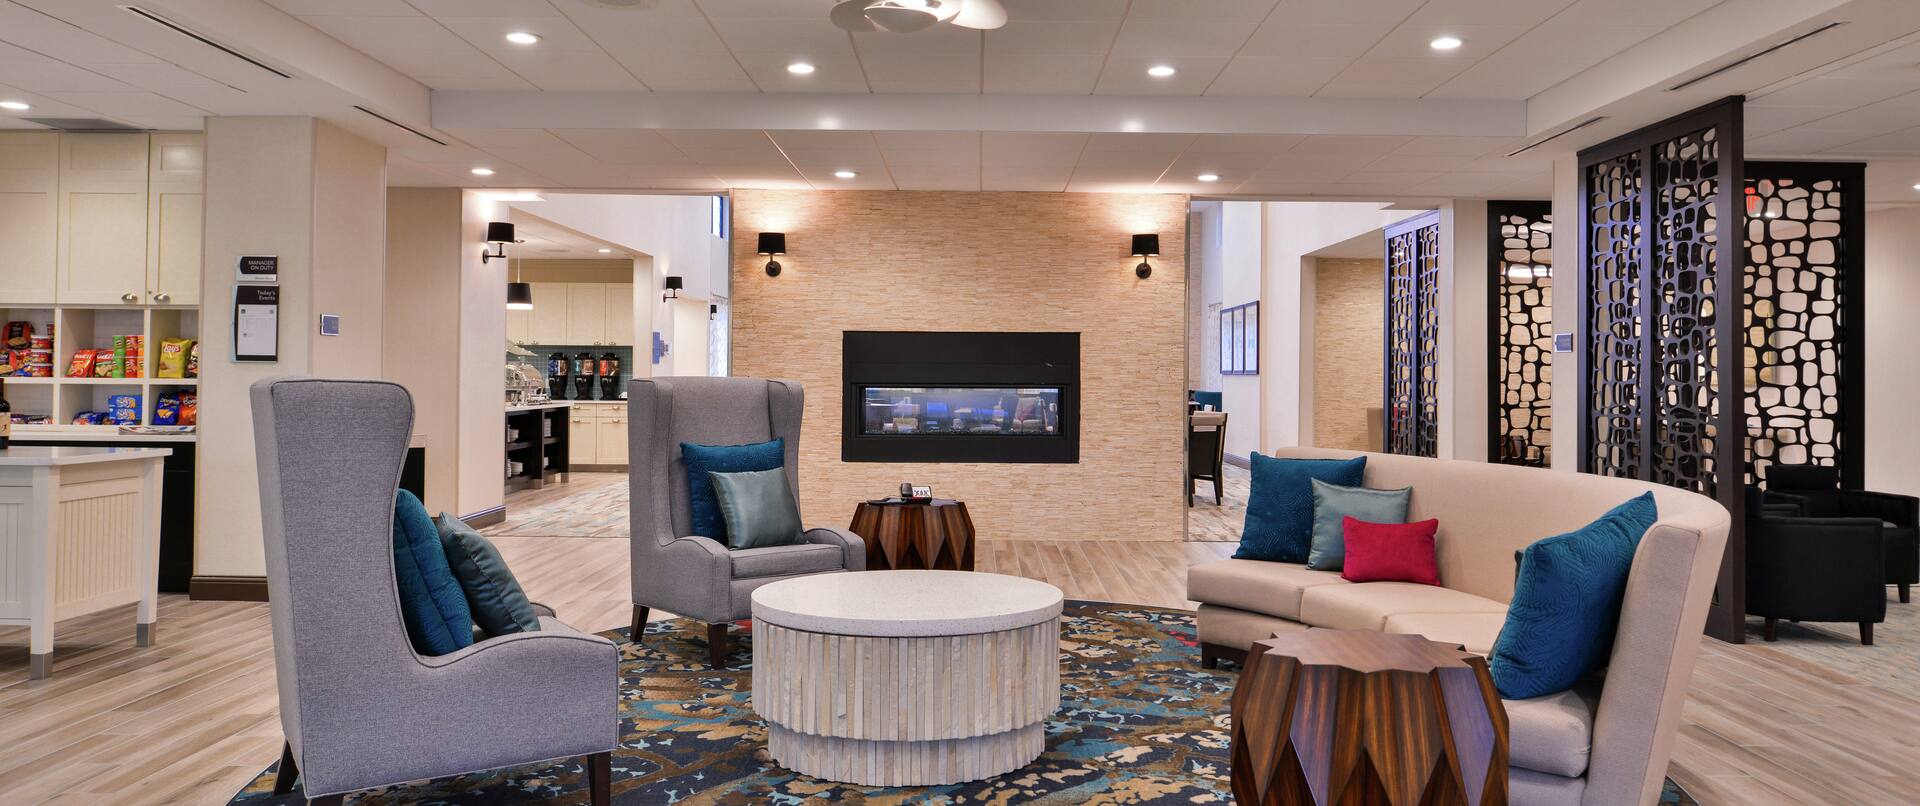 Lounge Seating in Front of Fireplace in Lobby